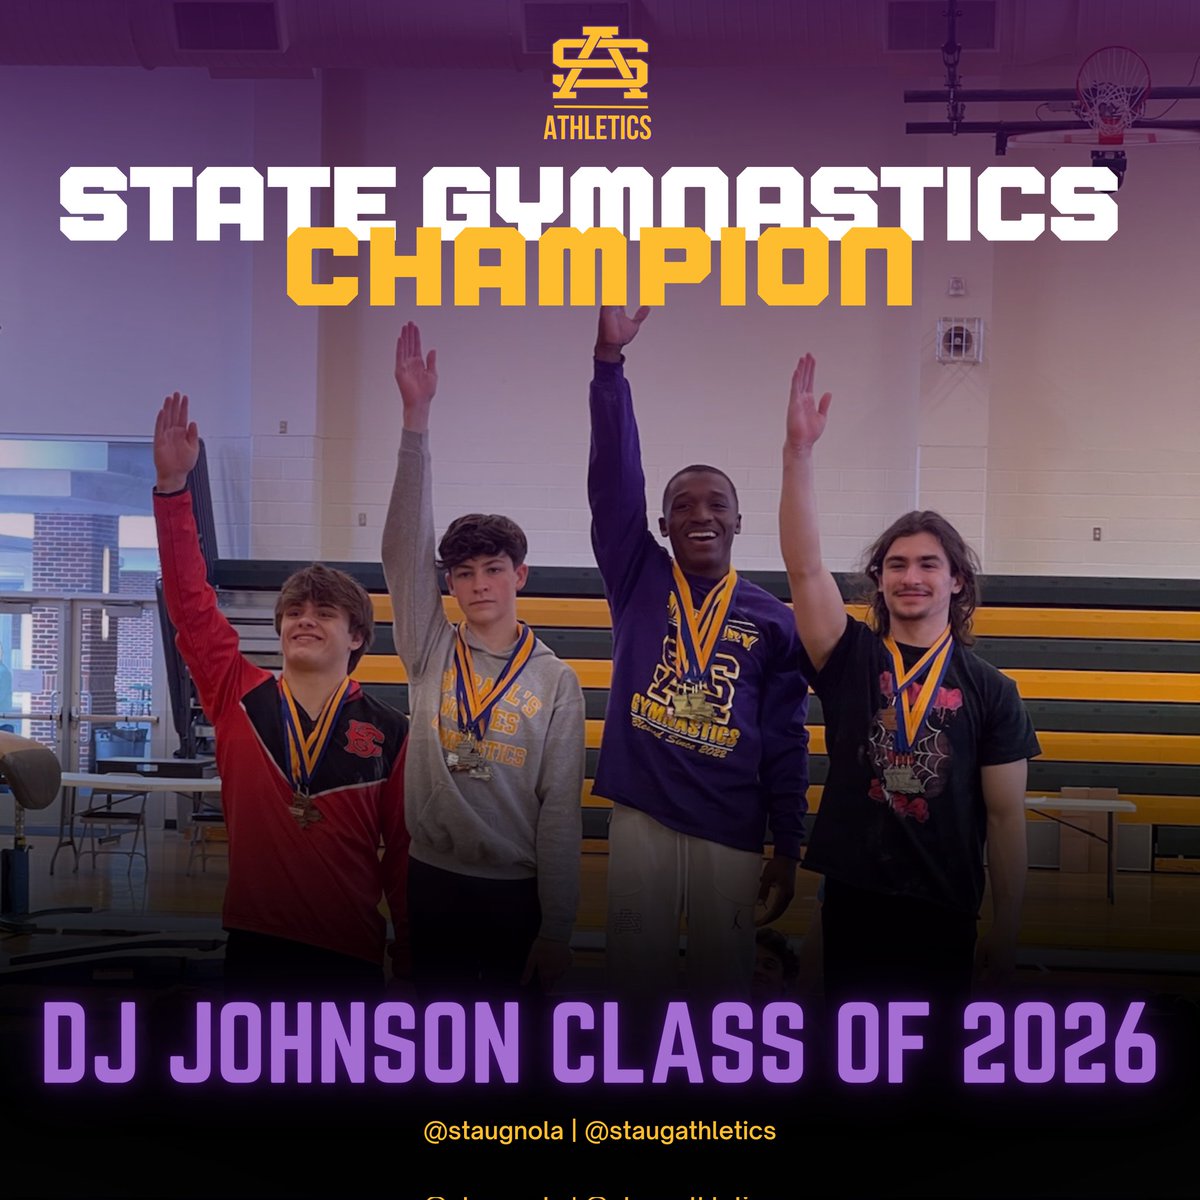 Join us in celebrating class of 2026's DJ Johnson for clinching St. Augustine High School's very first State Gymnastics Championship! DJ's hard work and dedication have truly paid off, earning him the top honors in the state. Congratulations on this incredible achievement!